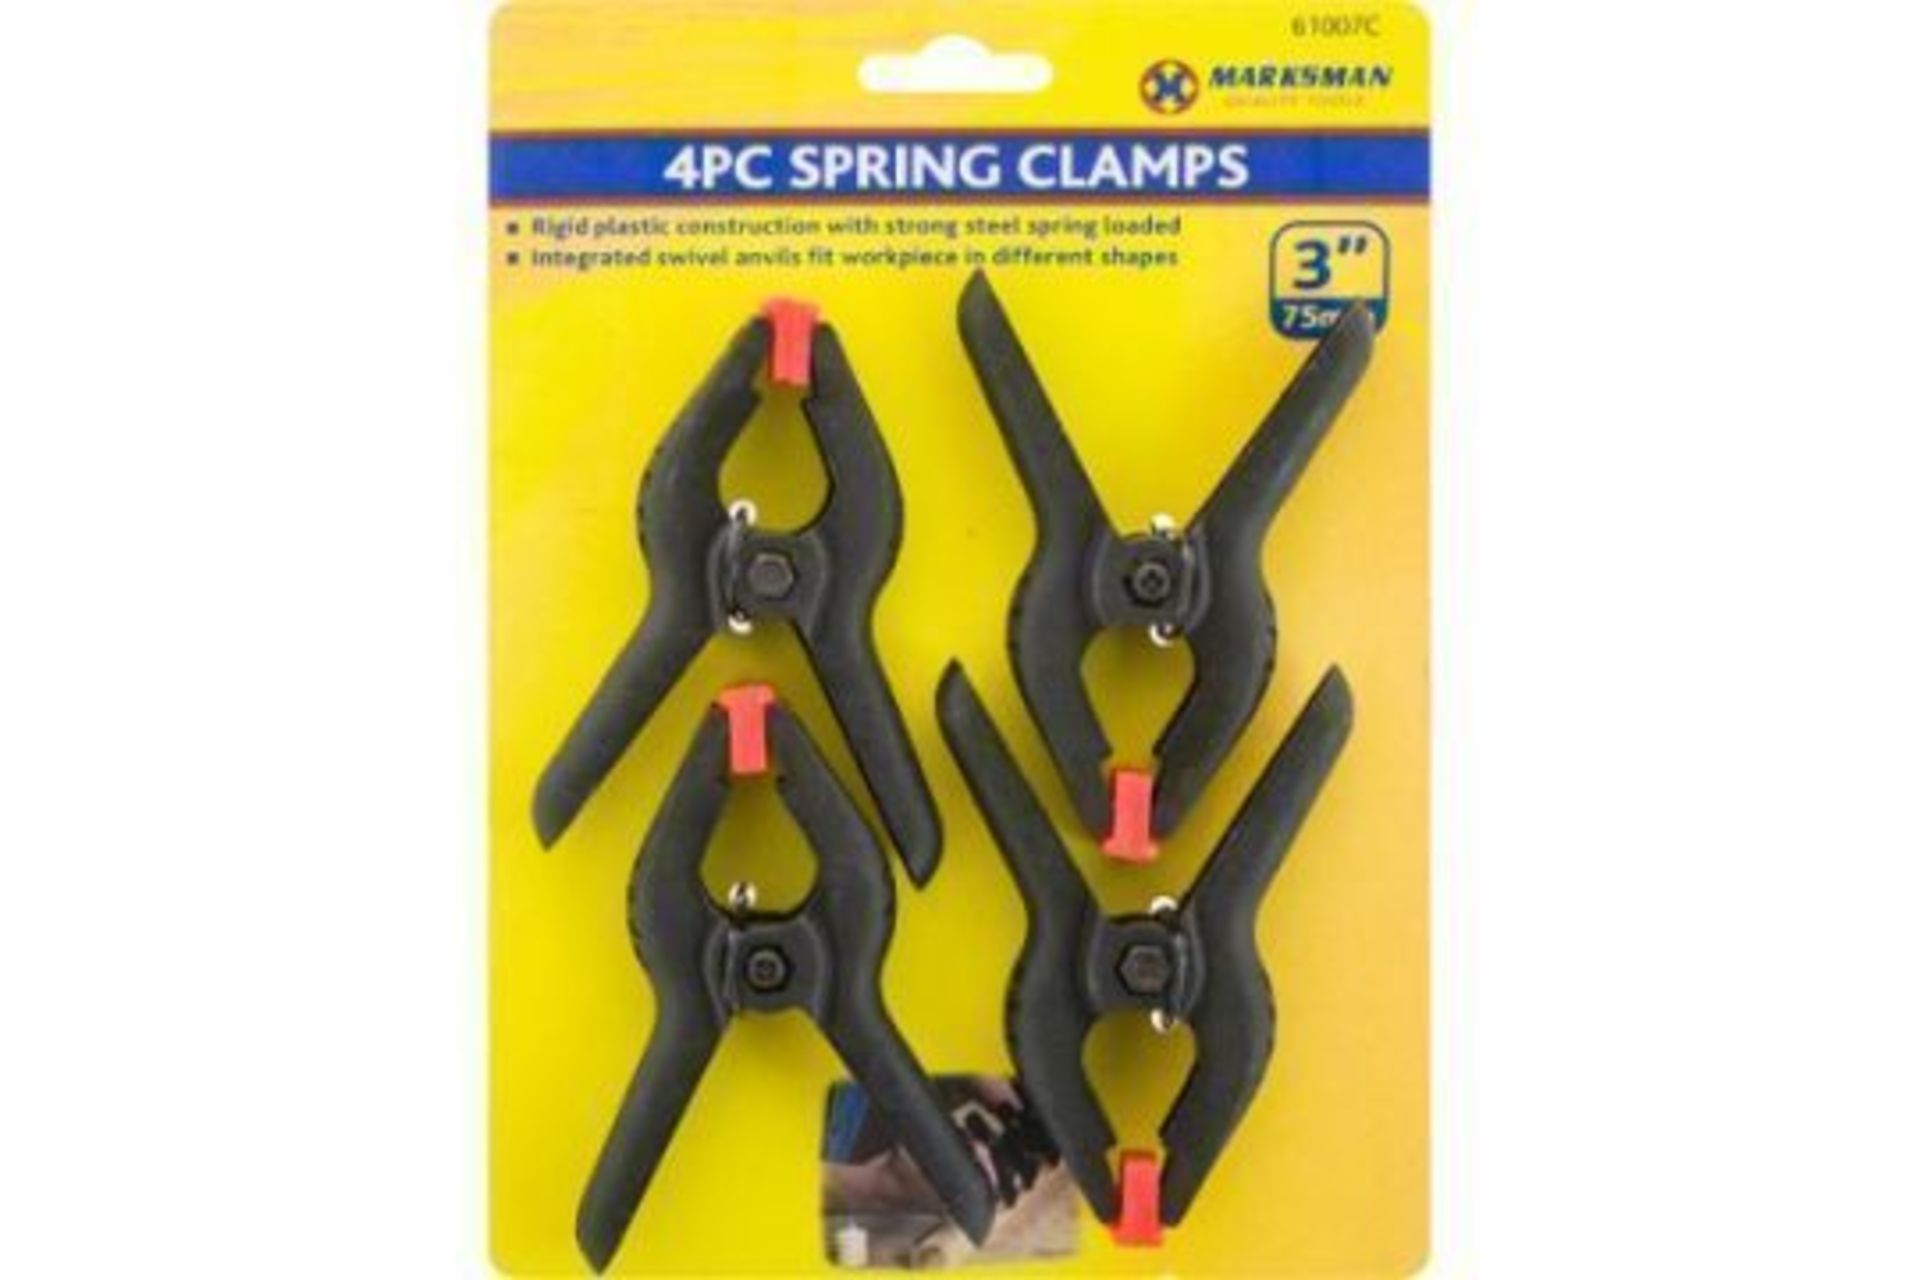 x3 Packs Of 3" Marksman 4PC Spring Clamps (12 In Total)